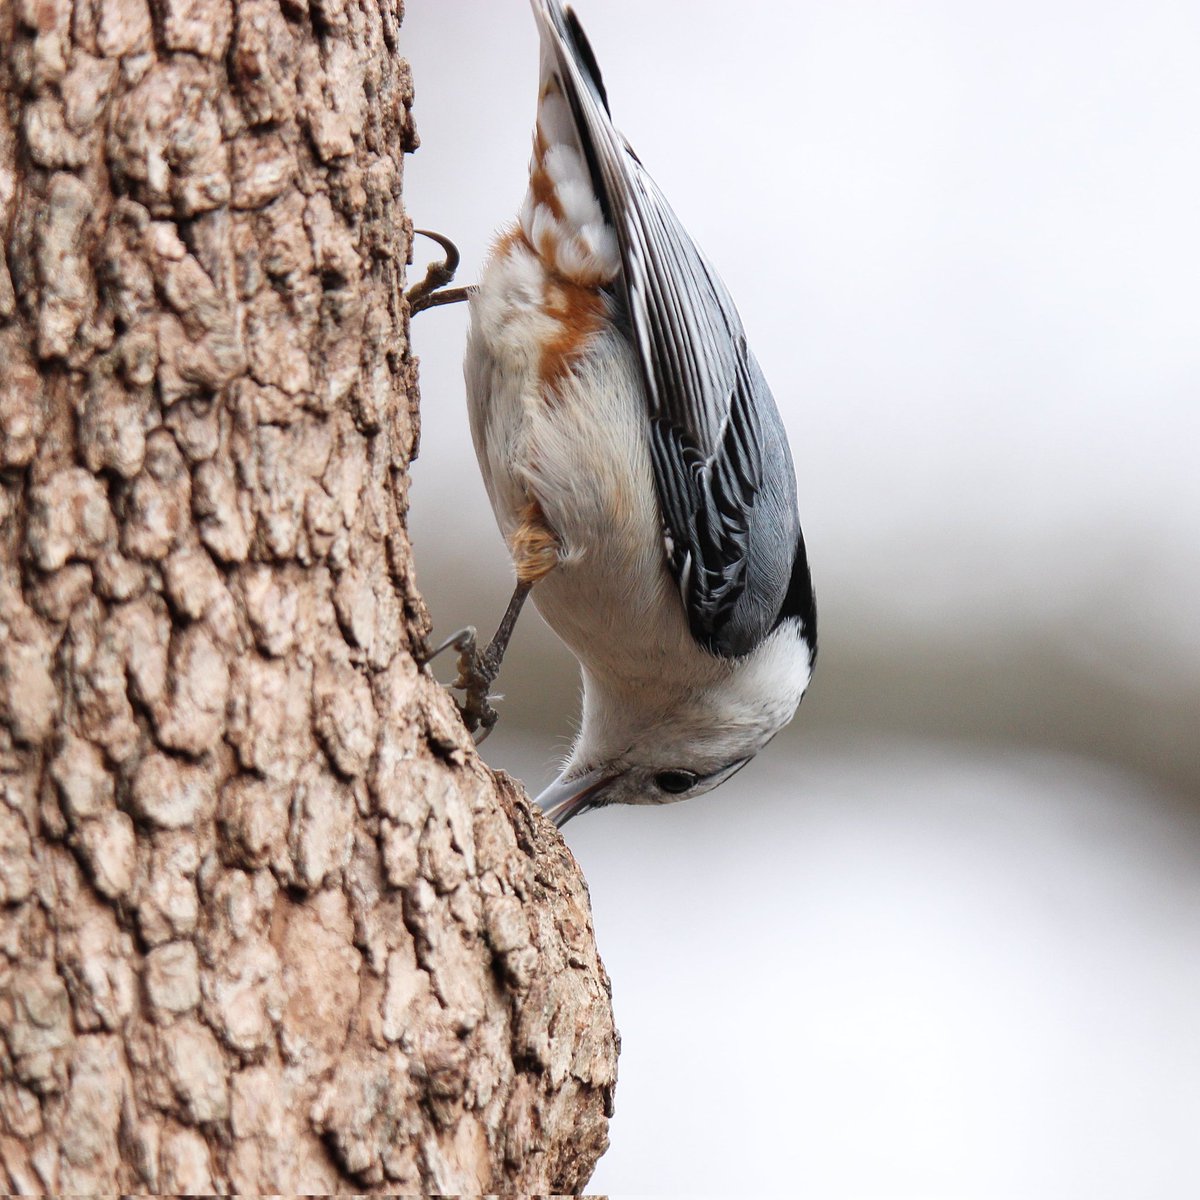 This white-breasted nuthatch is busy at work, breaking open a sunflower seed...
#sunflowerseeds #sunflower #sunflowerseed #birding #ohiobirding #ohiobirdworld #ohiobirdingphotography #ohiobirdlovers #nuthatch #whitebreastednuthatches #nuthatches #seeds #nuthatchpower